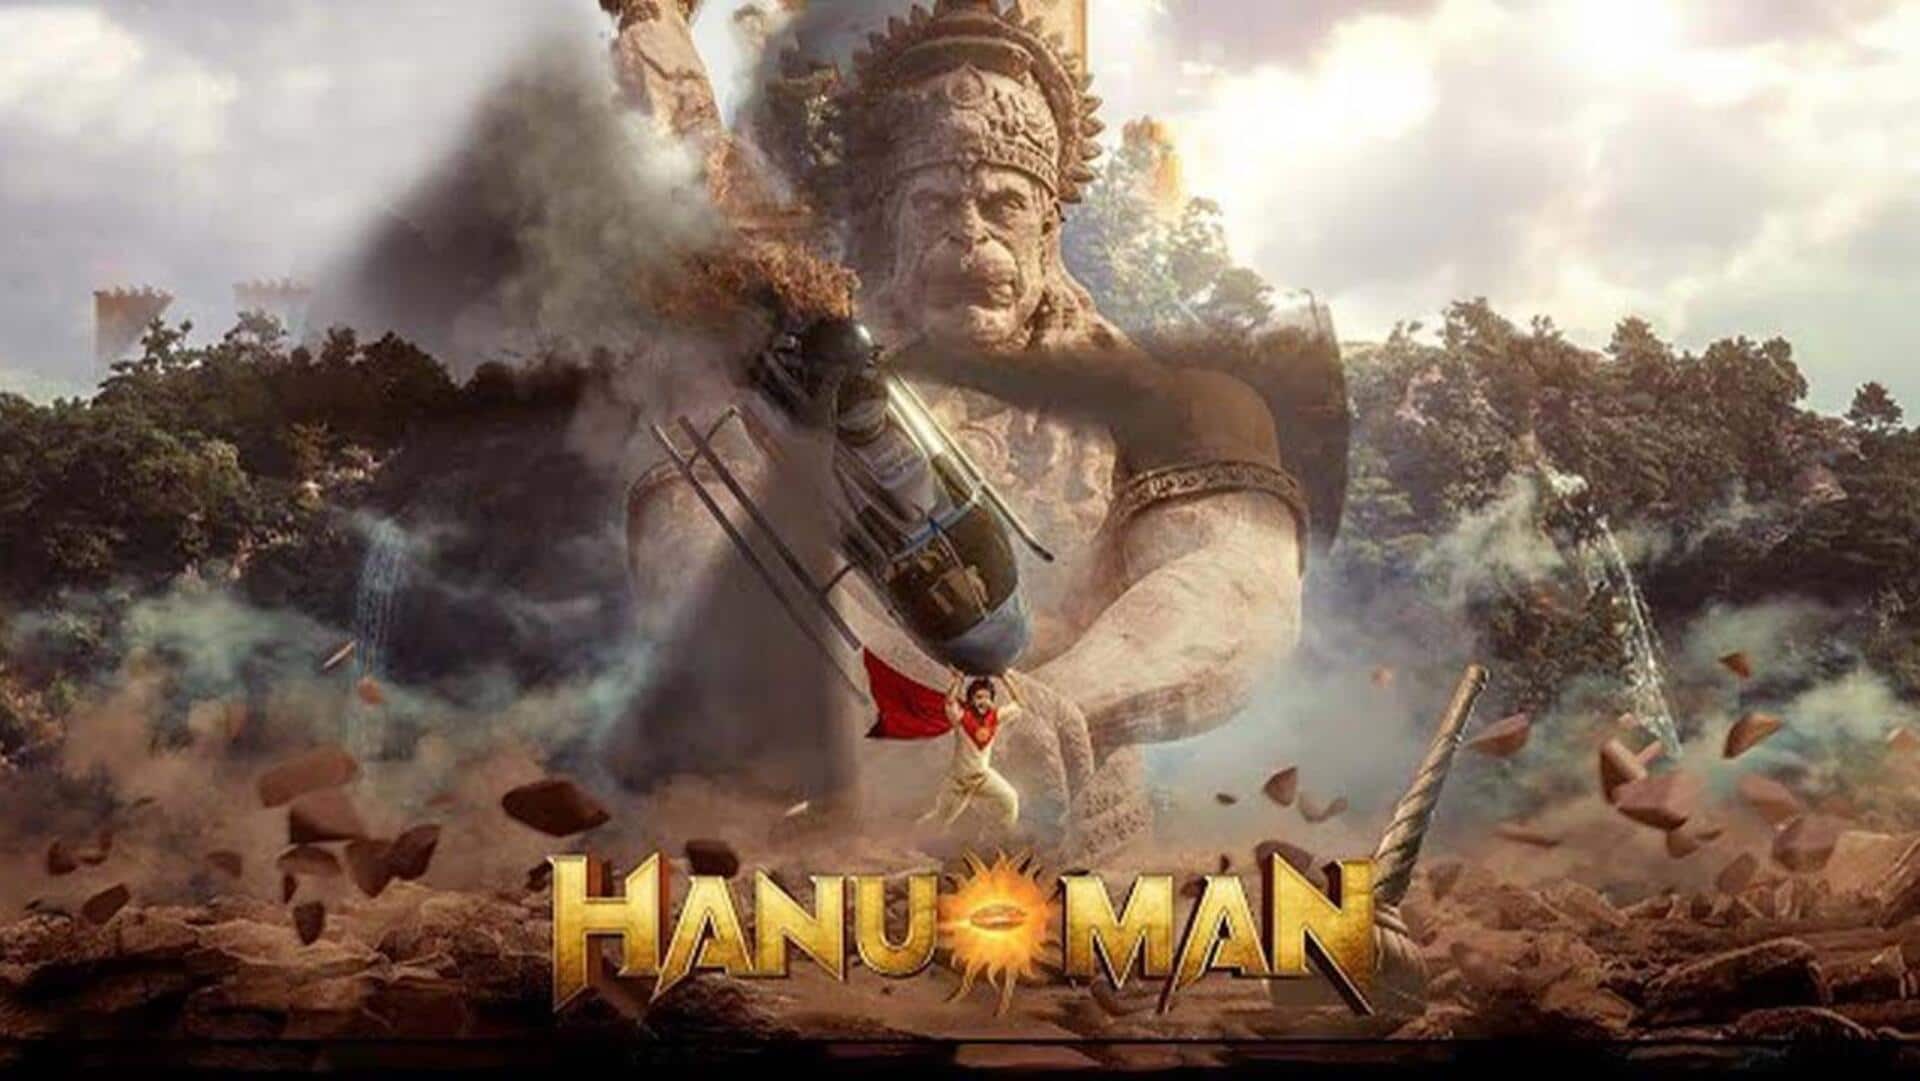 Box office collection: 'Hanu-Man' marches toward Rs. 150cr mark